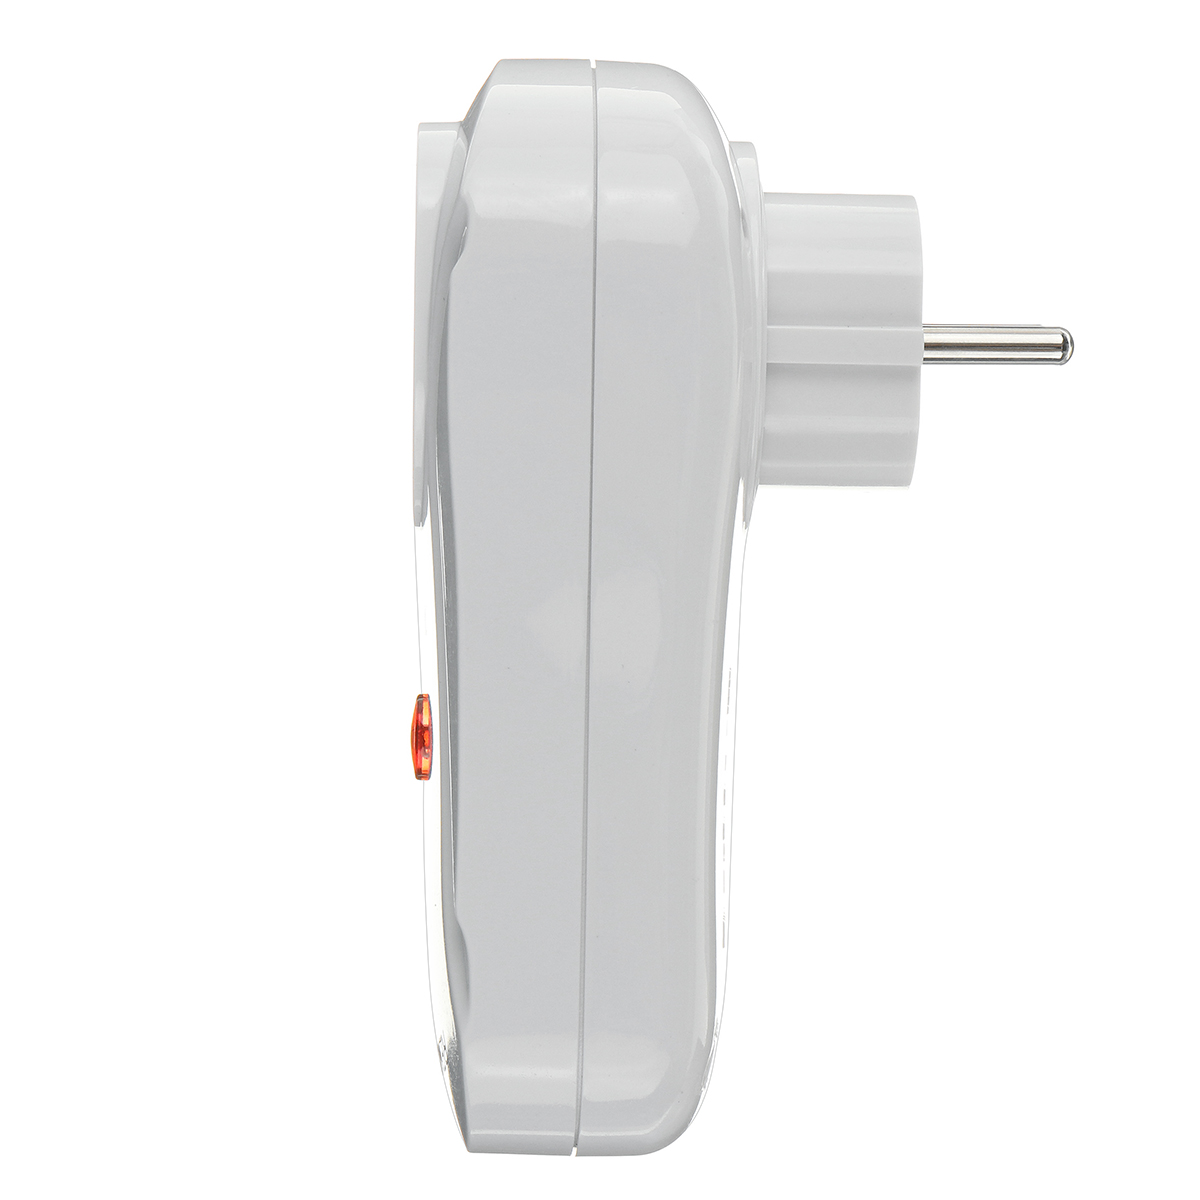 Wireless-Remote-Control-Socket-Switch-For-Food-Waste-Disposers-Garbage-Disposals-Socket-1595768-8